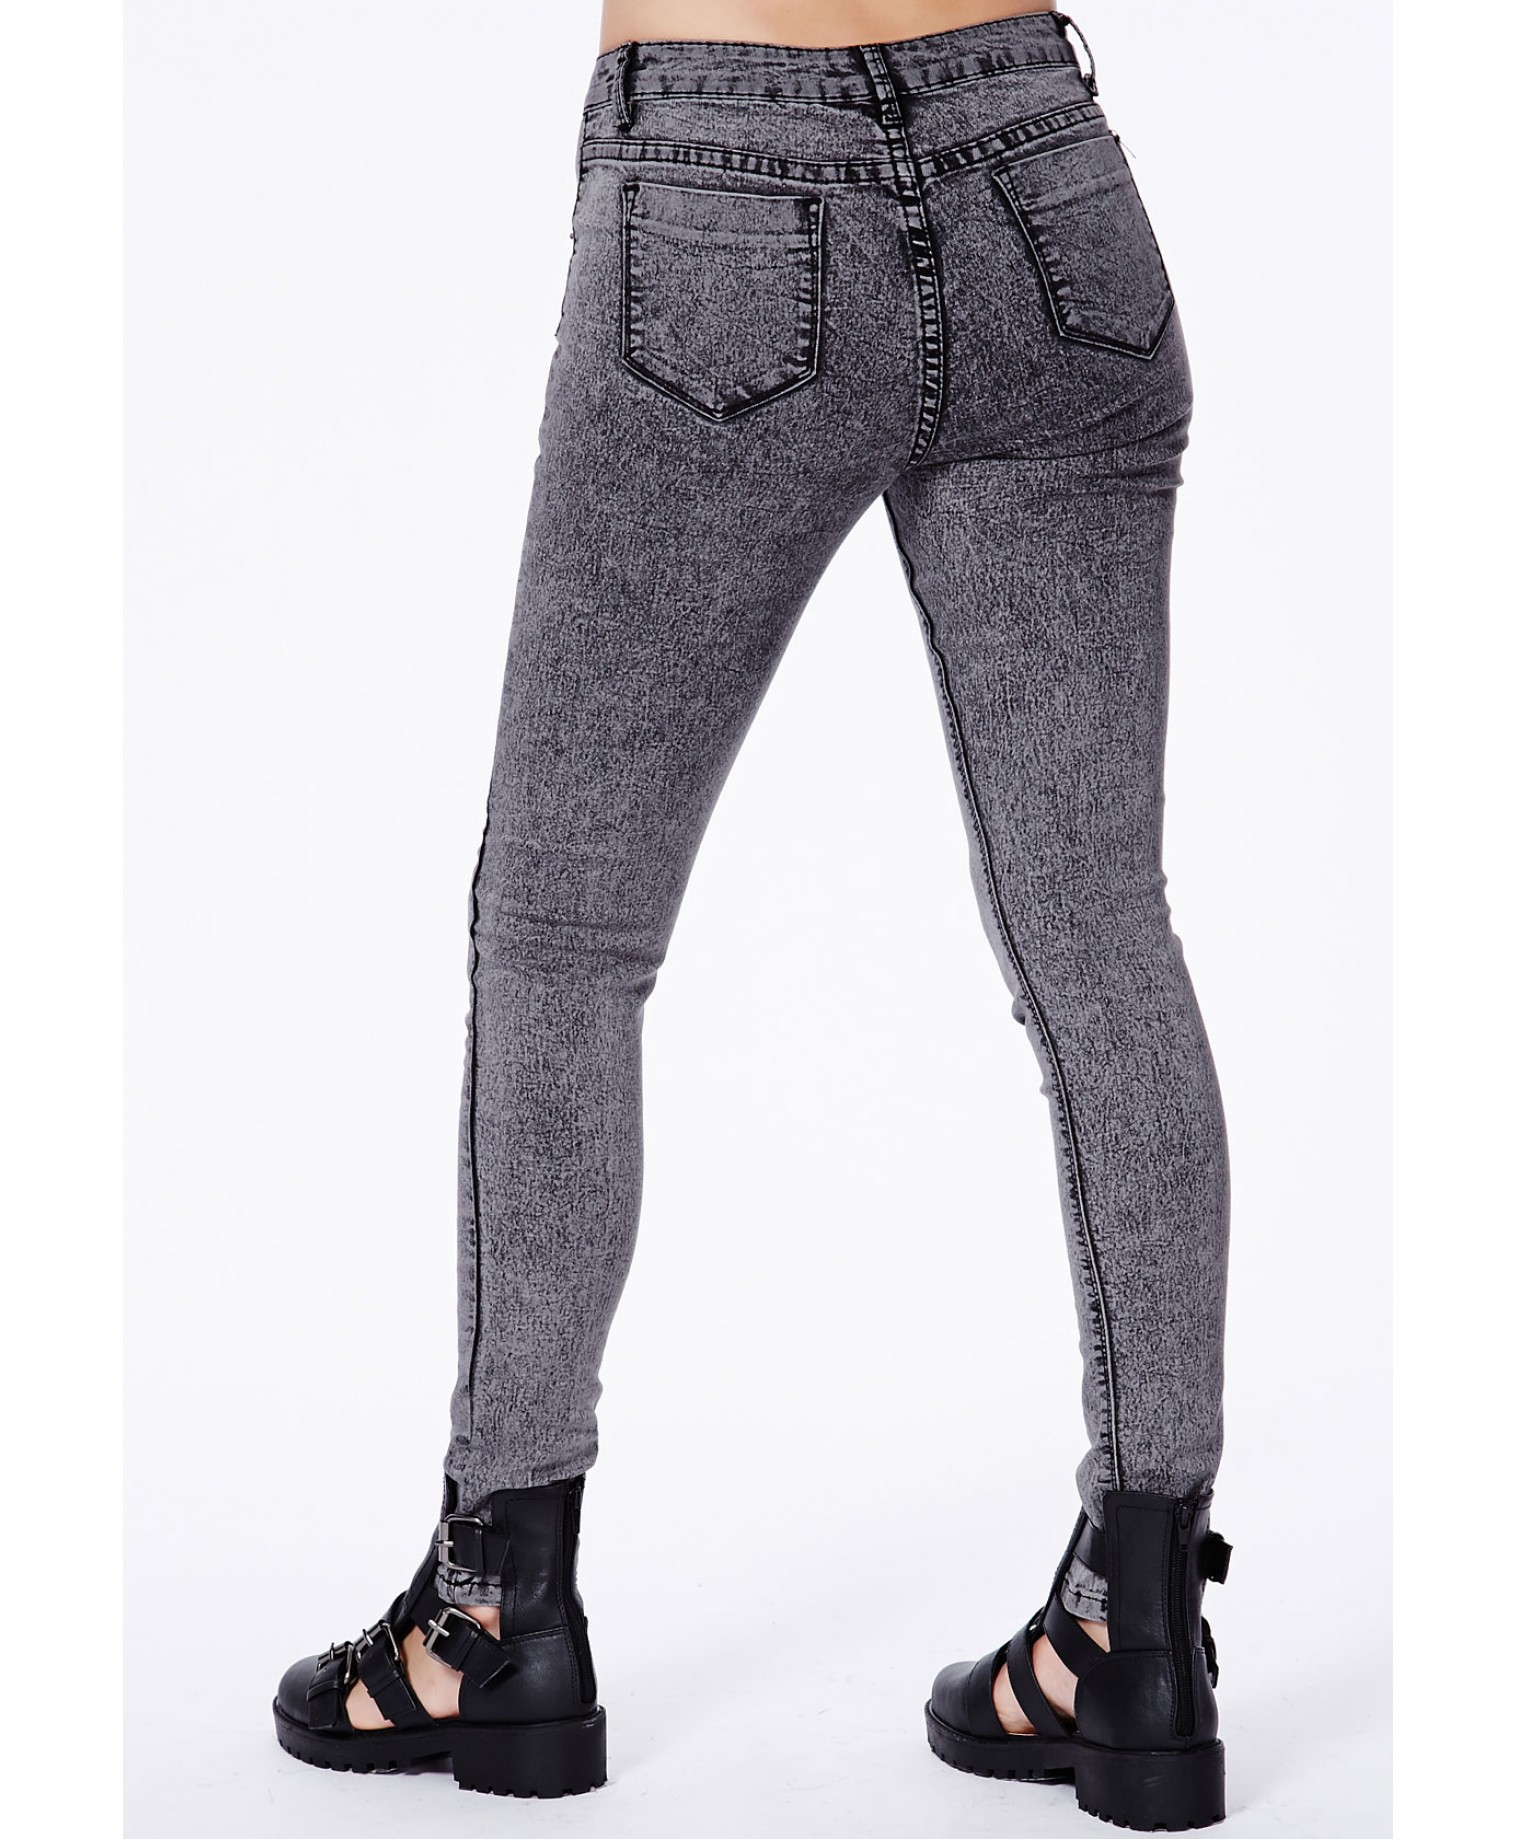 Missguided Lana Mid Rise Skinny Jeans in Black Acid Wash - Lyst